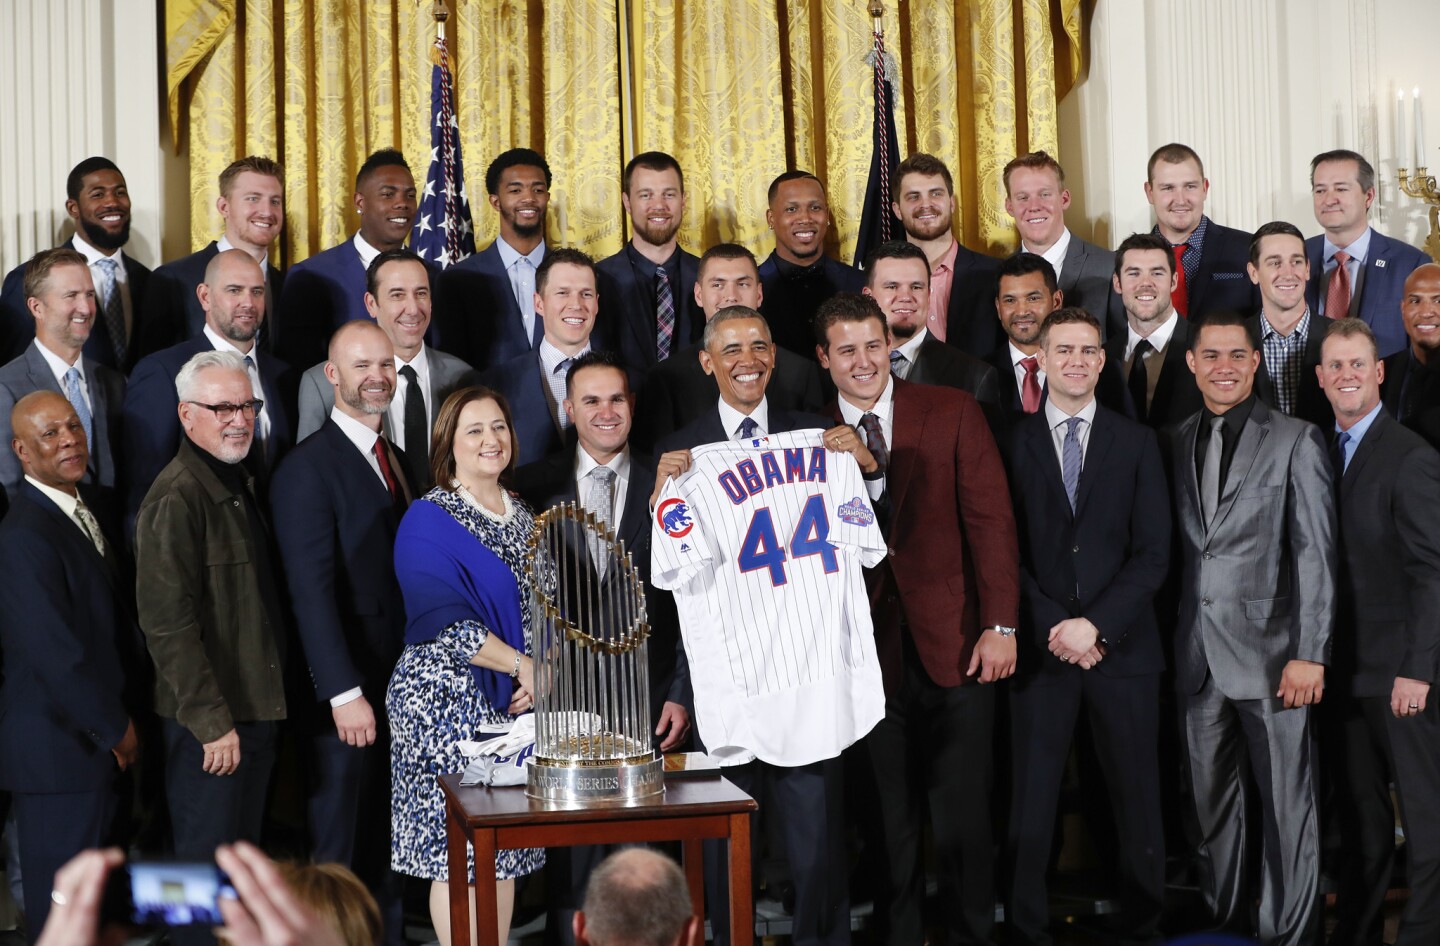 President Barack Obama holds up a personalized Chicago Cubs baseball jersey presented to him for a group photo during a ceremony in the East Room of the White House in Washington, Monday, Jan. 16, 2017, where the president honored the 2016 World Series Champion baseball team. (AP Photo/Pablo Martinez Monsivais)